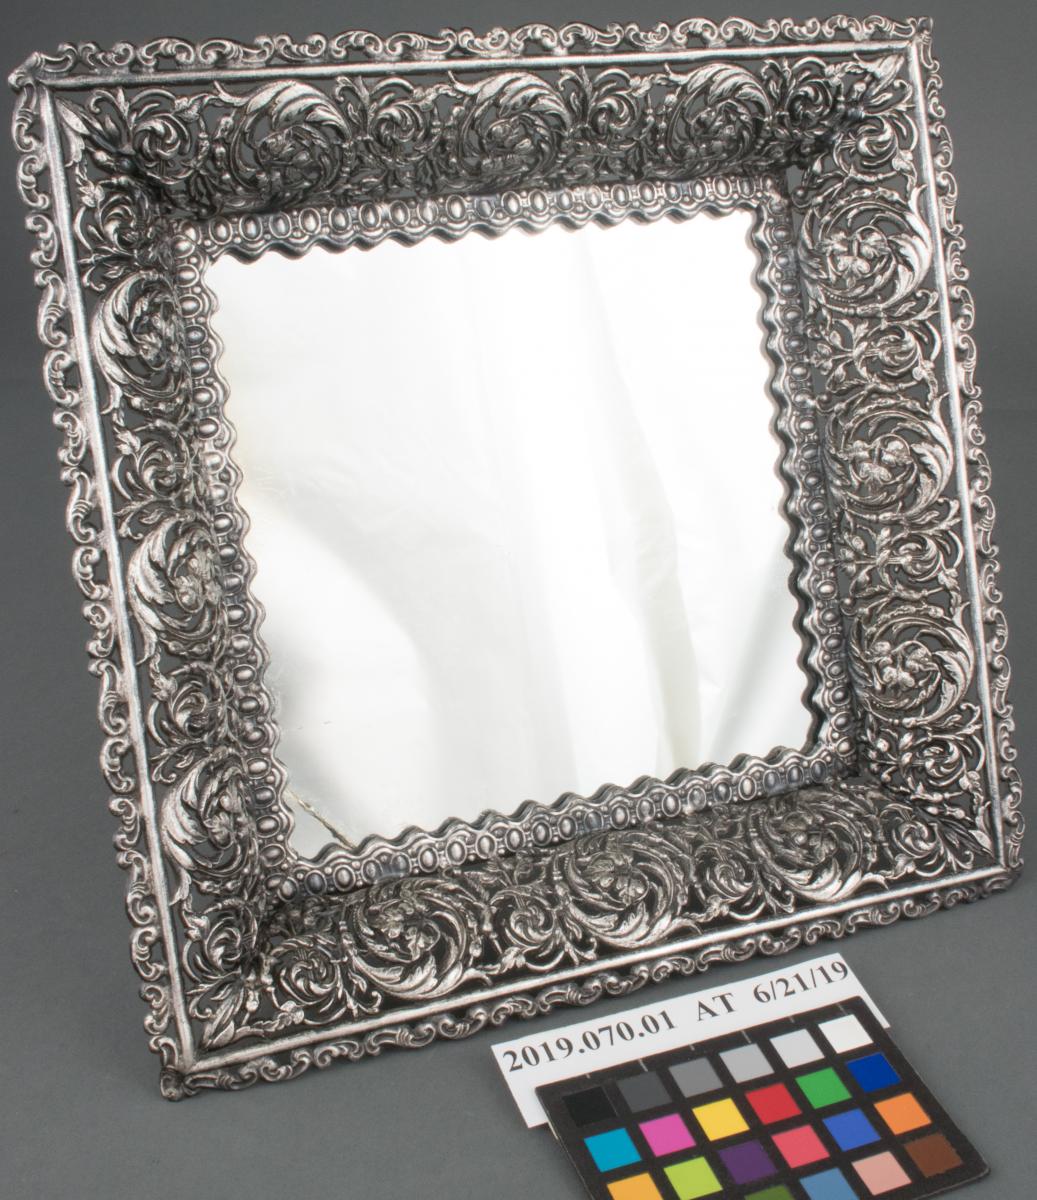 after treatment photo of silver framed mirror with leaf and floral border.